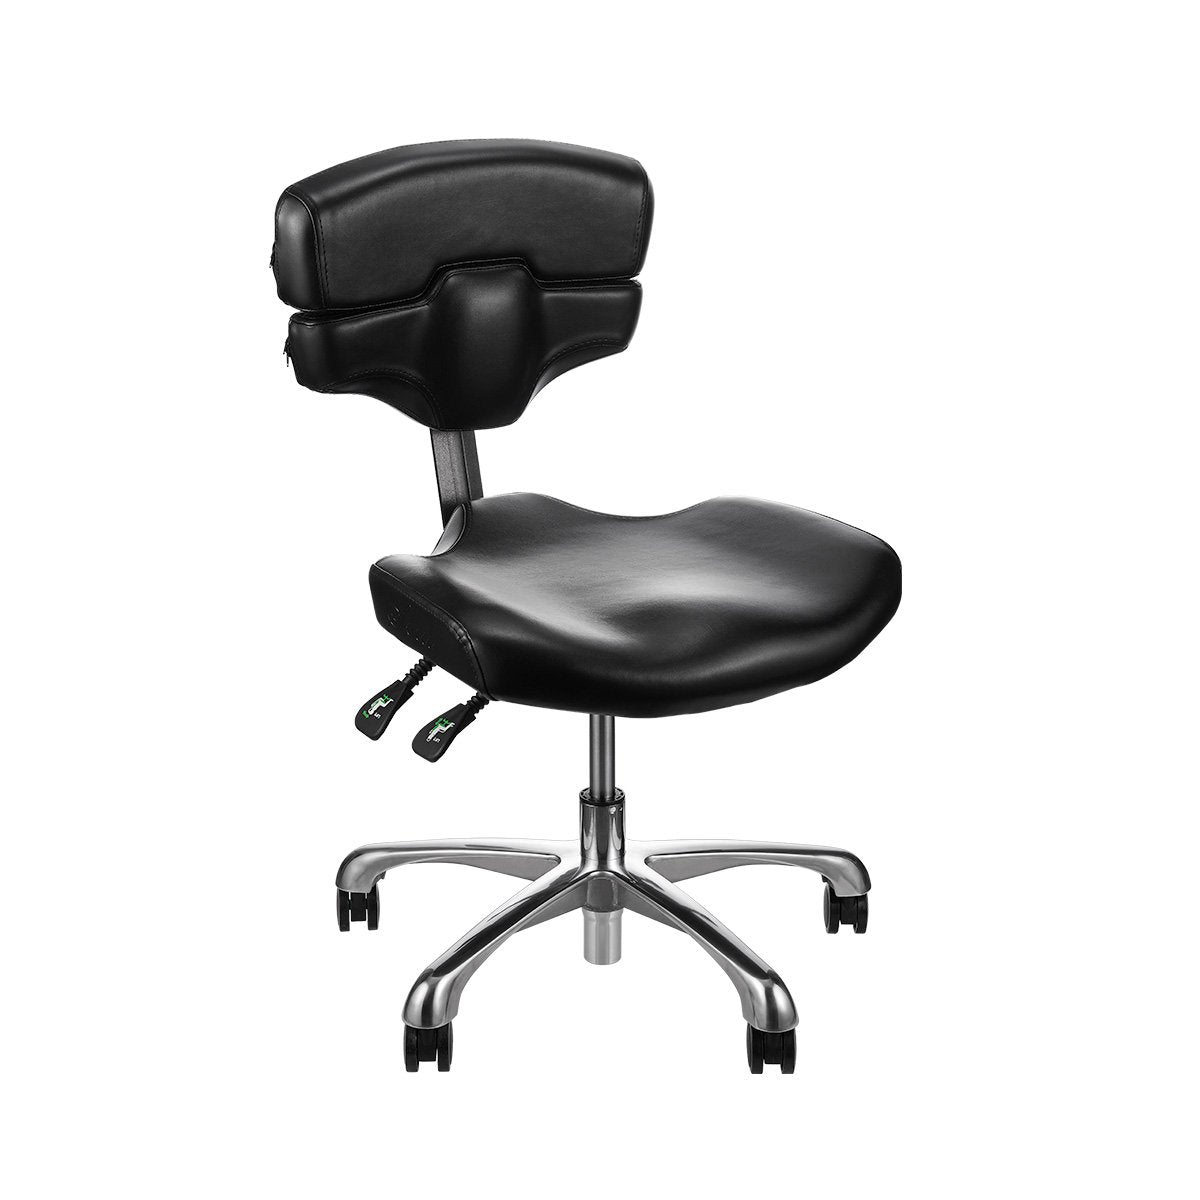 A black Mako Low Tattoo Artist Chair for artists who like to sit lower.